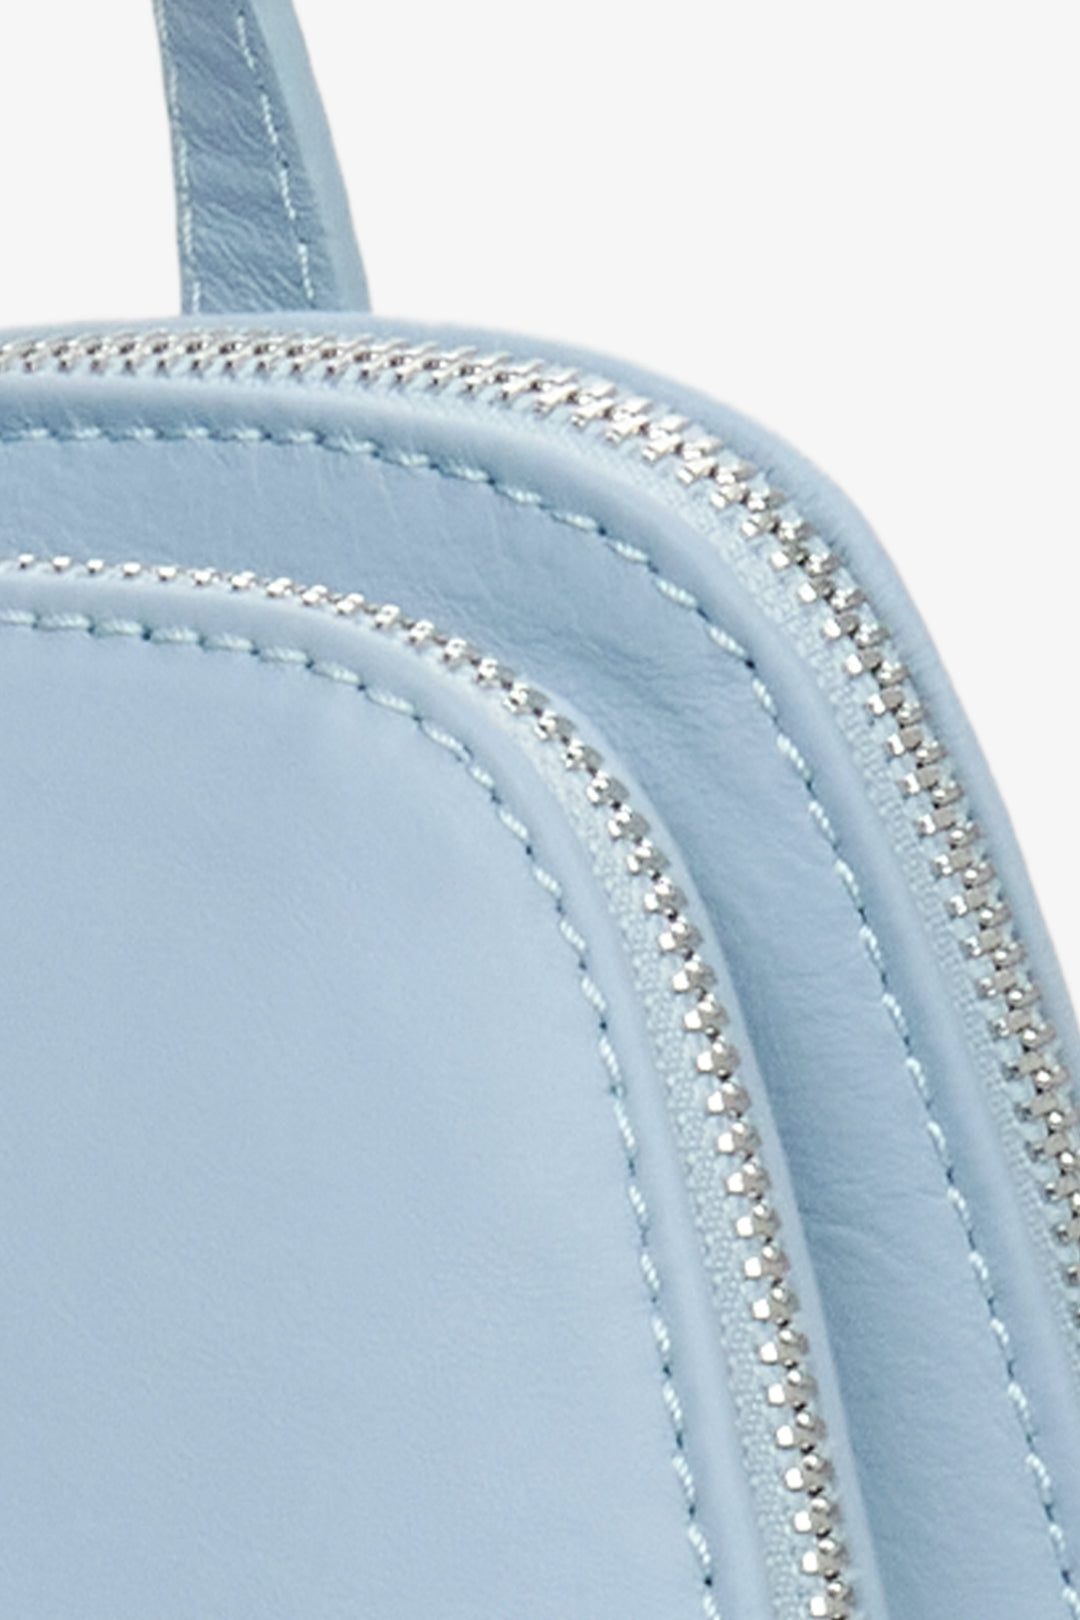 Light blue backpack made of genuine Italian leather by Estro - close-up on detail.